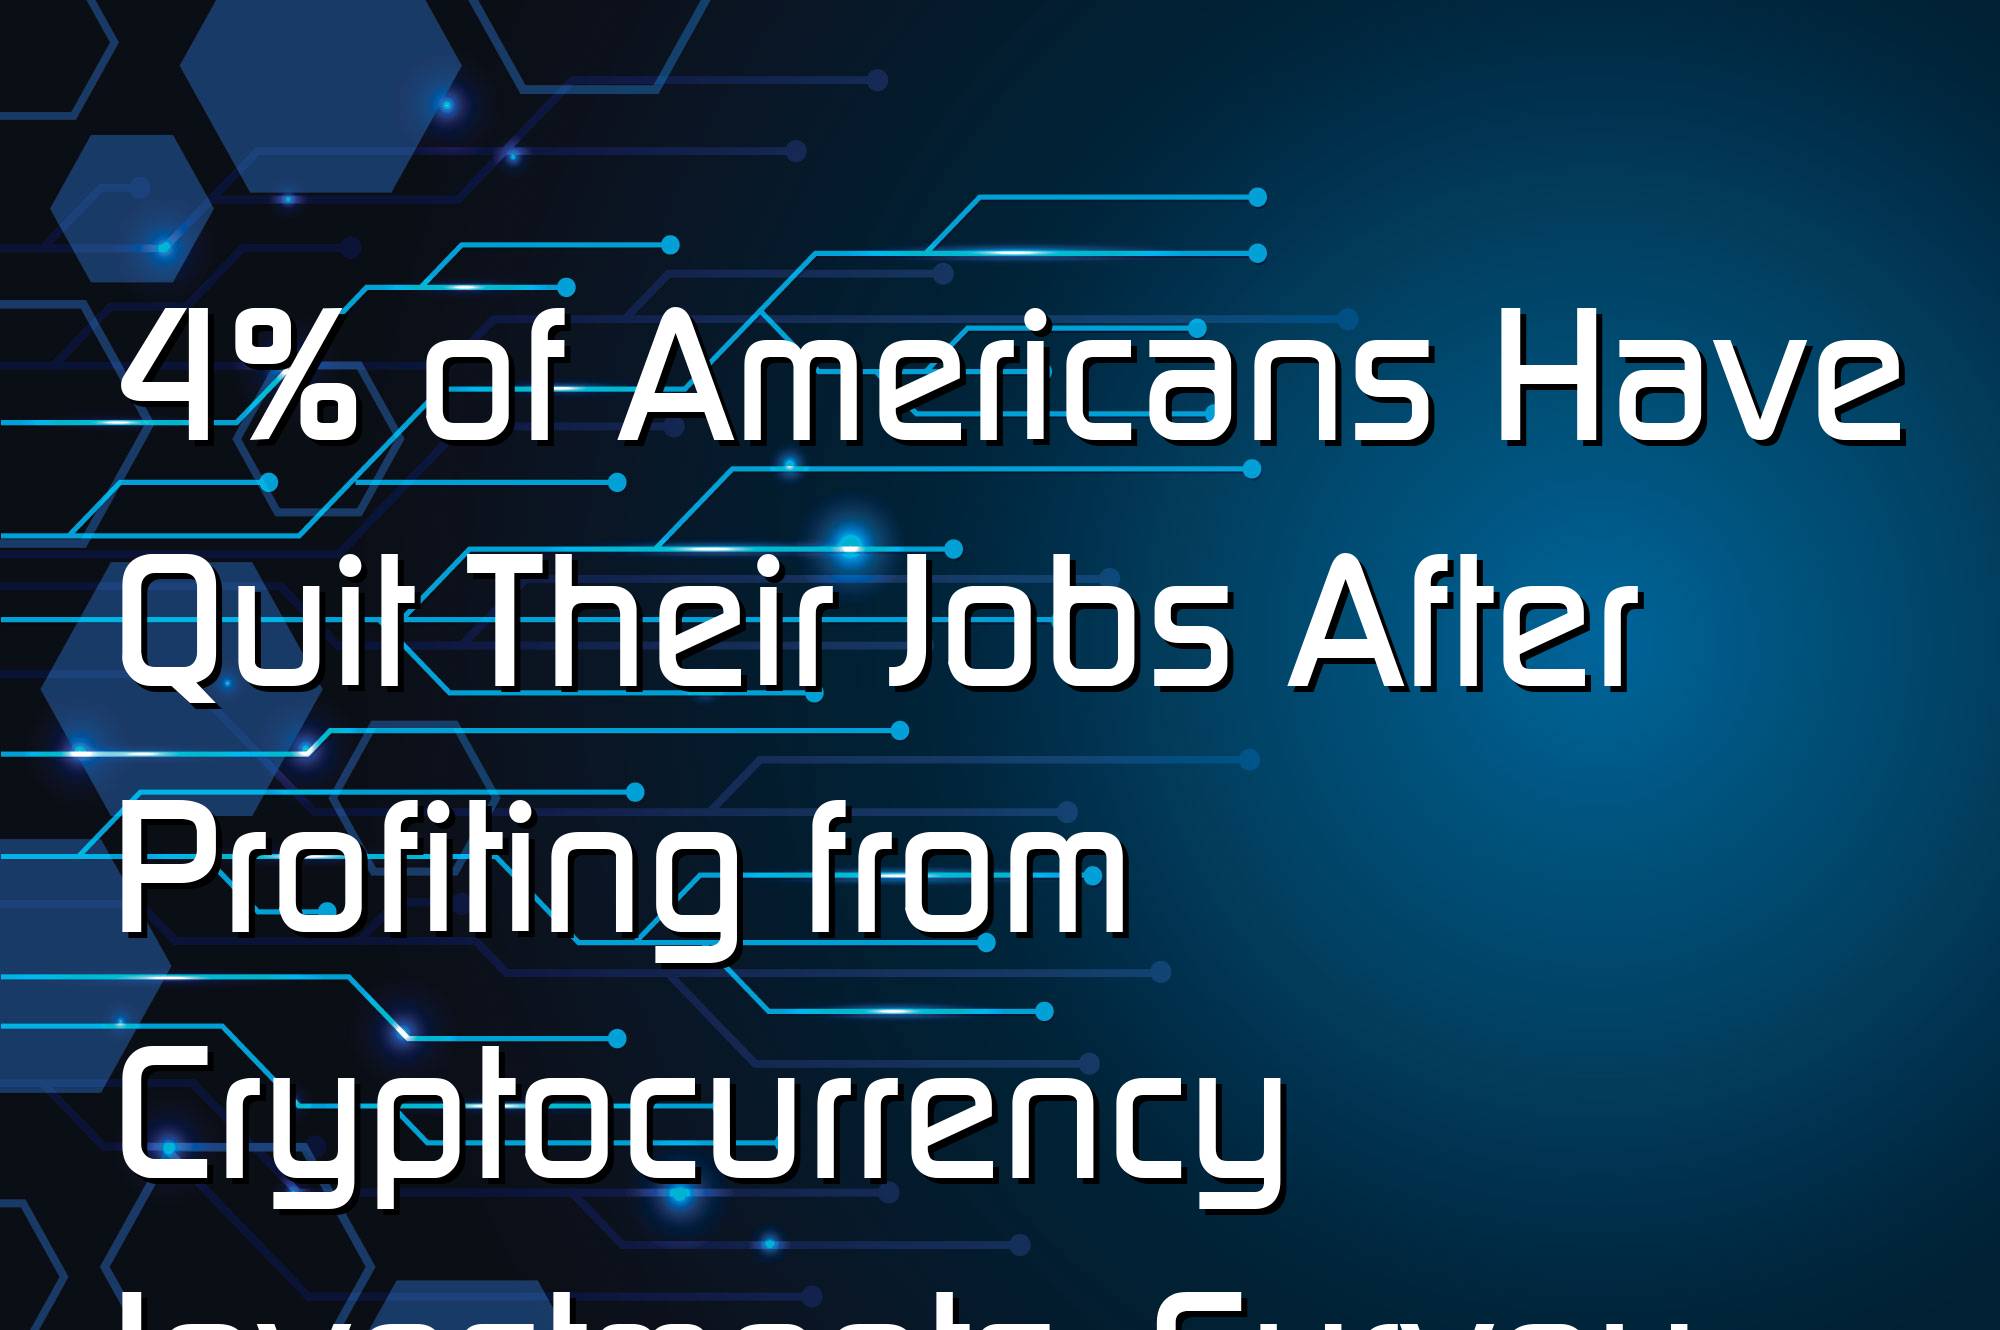 @$62042: 4% of Americans Have Quit Their Jobs After Profiting from Cryptocurrency Investments: Survey